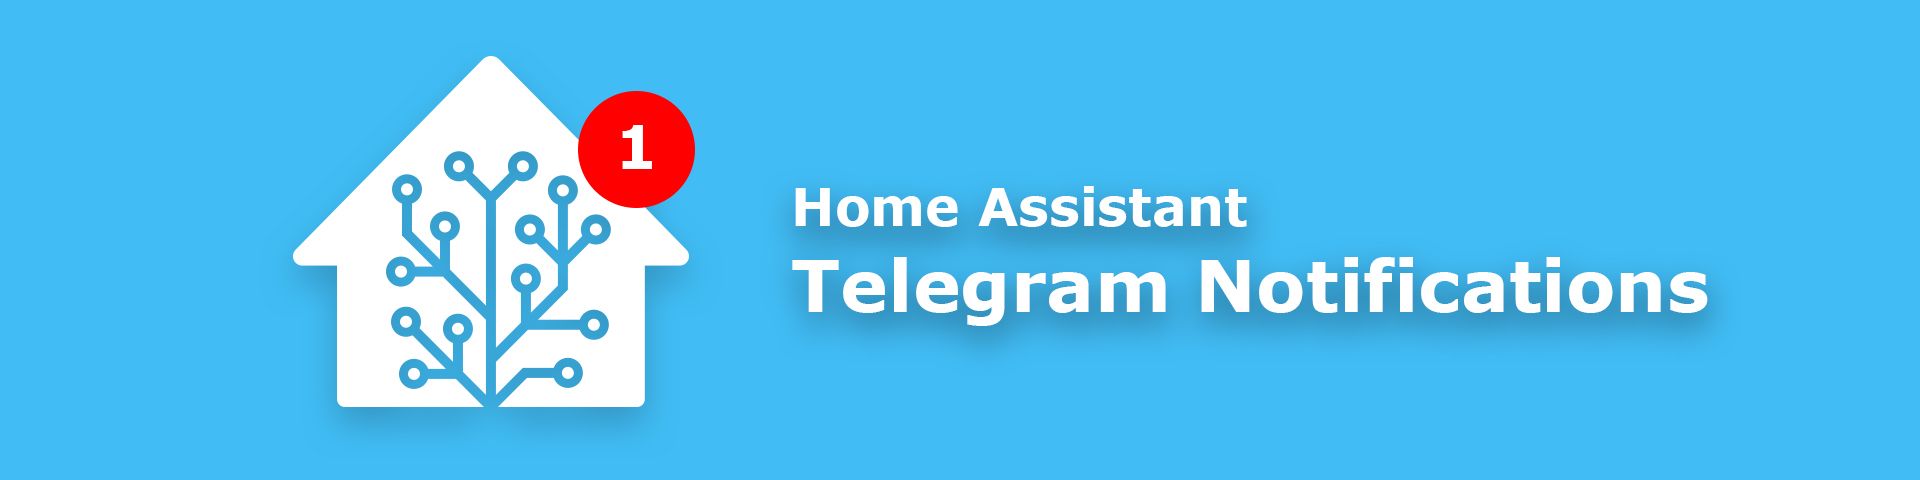 Home Assistant notifications on Telegram